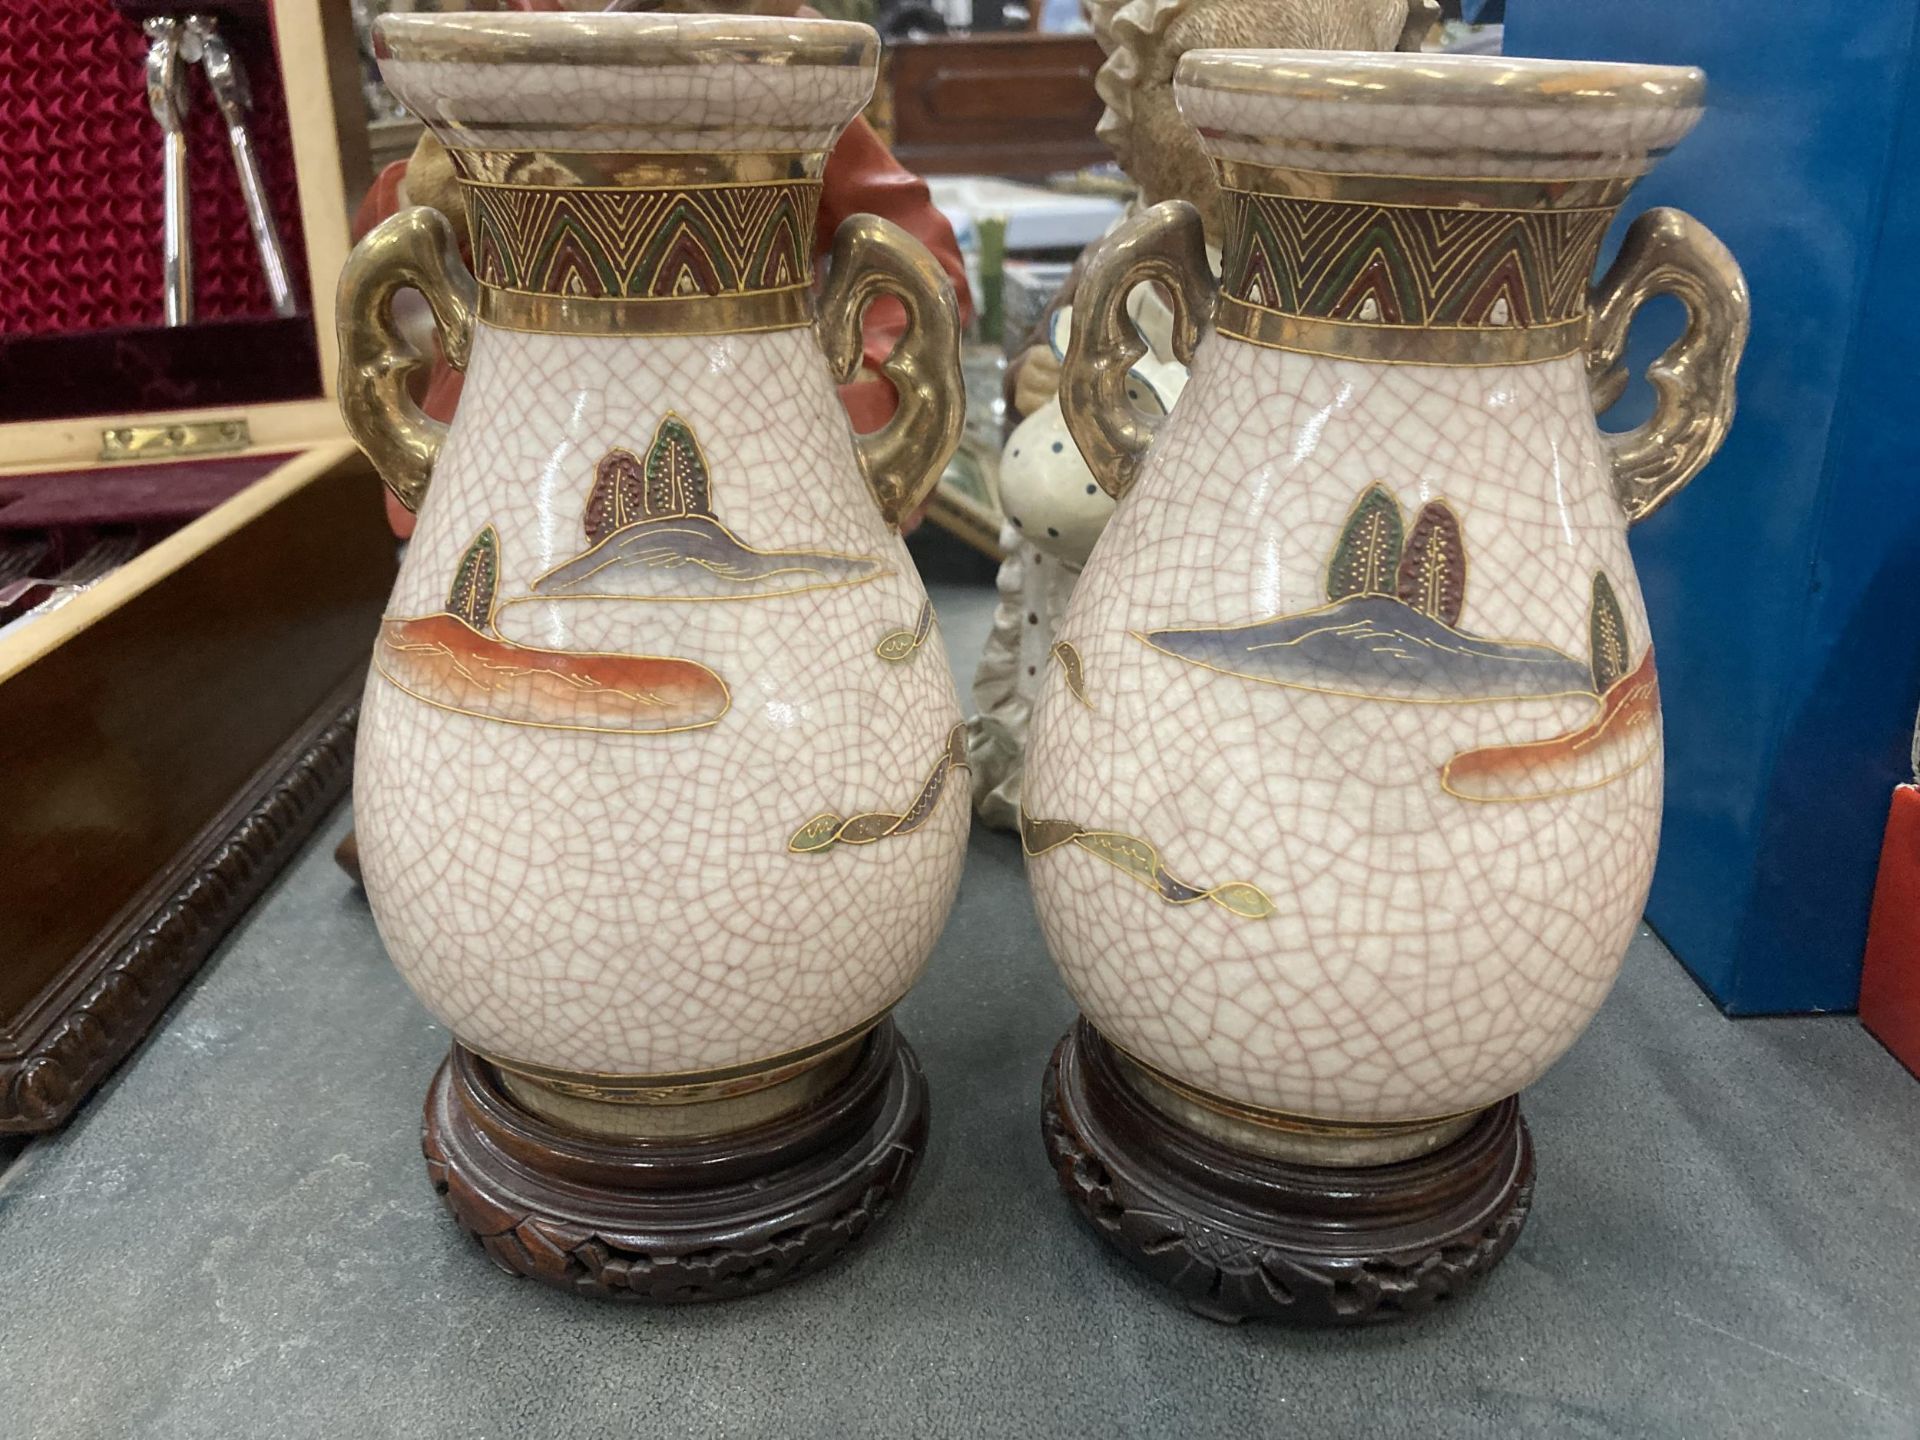 A PAIR OF TWIN HANDLED SATSUMA VASES ON WOODEN STANDS - Image 2 of 3